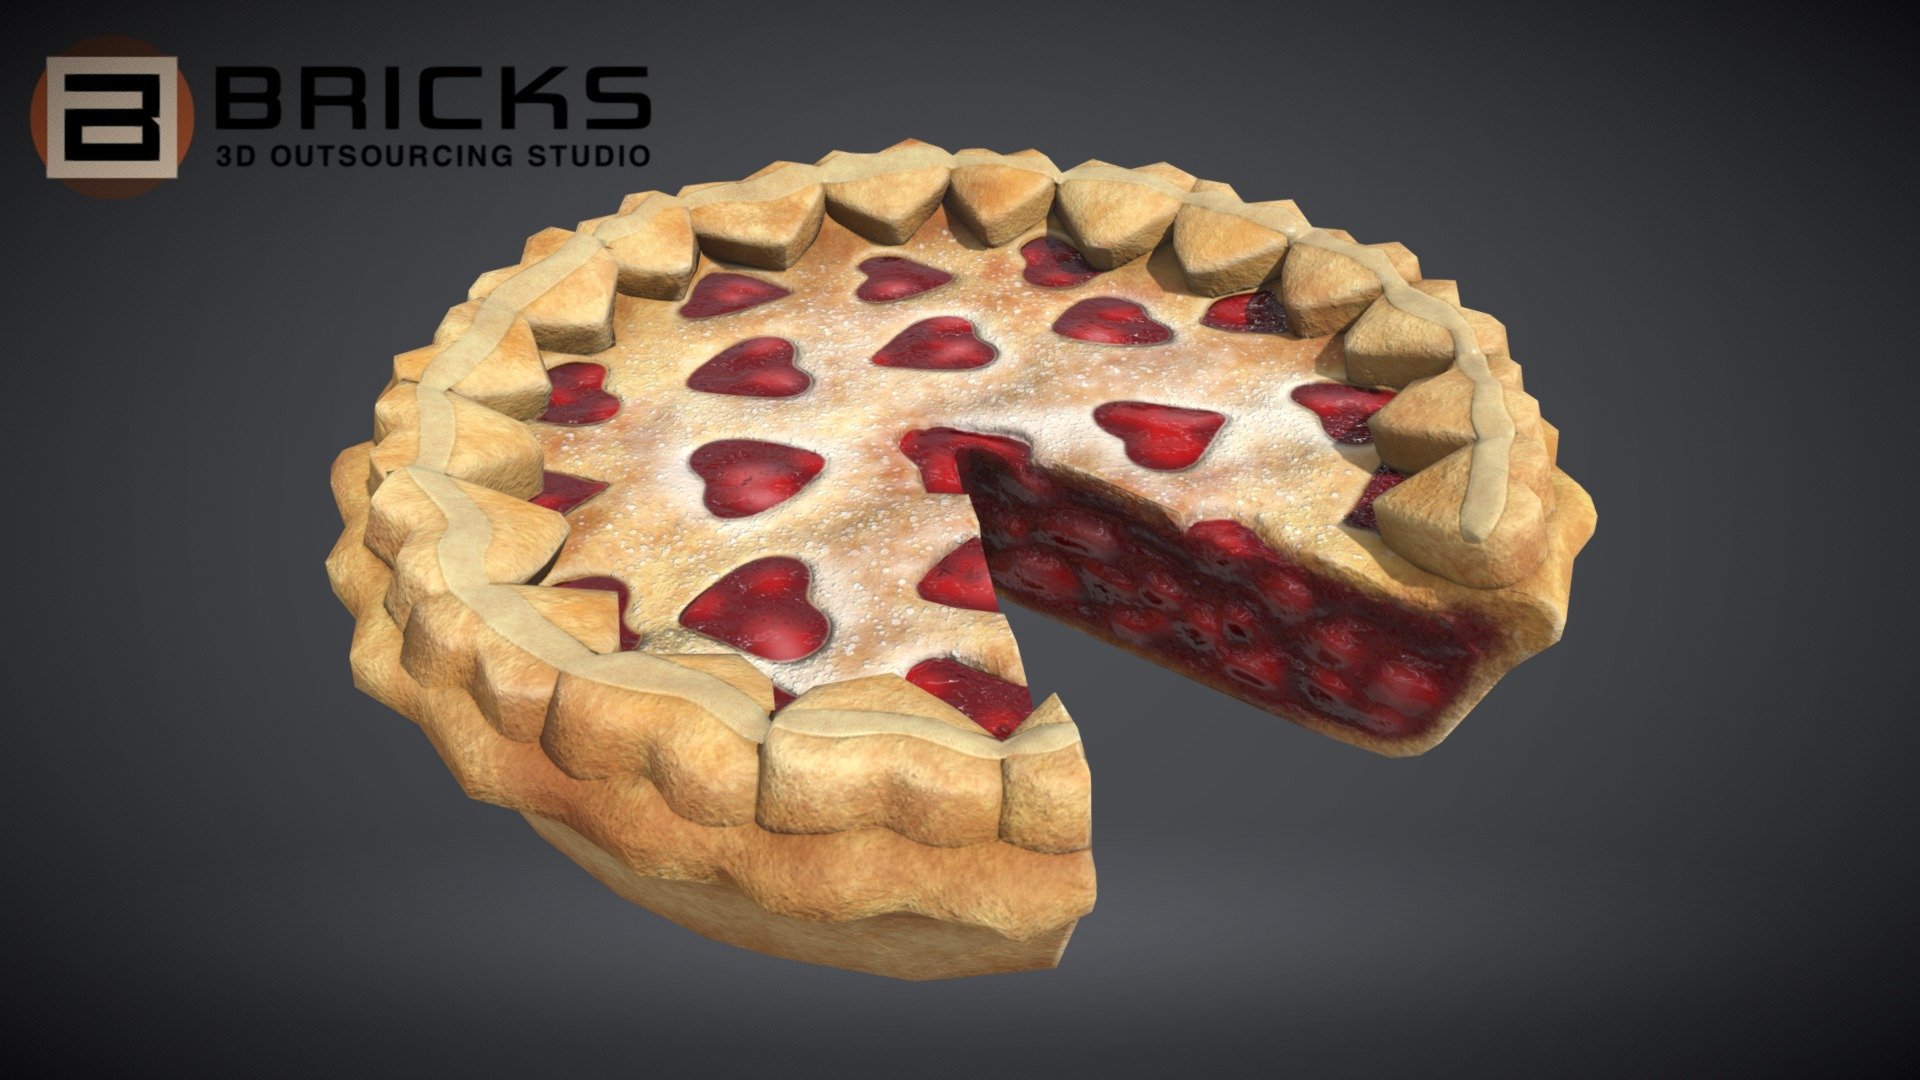 PBR Food Asset:
PieStrawberryHeartChart
Polycount: 1504
Vertex count: 754
Texture Size: 2048px x 2048px
Normal: OpenGL

If you need any adjust in file please contact us: team@bricks3dstudio.com

Hire us: tringuyen@bricks3dstudio.com
Here is us: https://www.bricks3dstudio.com/
        https://www.artstation.com/bricksstudio
        https://www.facebook.com/Bricks3dstudio/
        https://www.linkedin.com/in/bricks-studio-b10462252/ - PieStrawberryHeartChart - Buy Royalty Free 3D model by Bricks Studio (@bricks3dstudio) 3d model